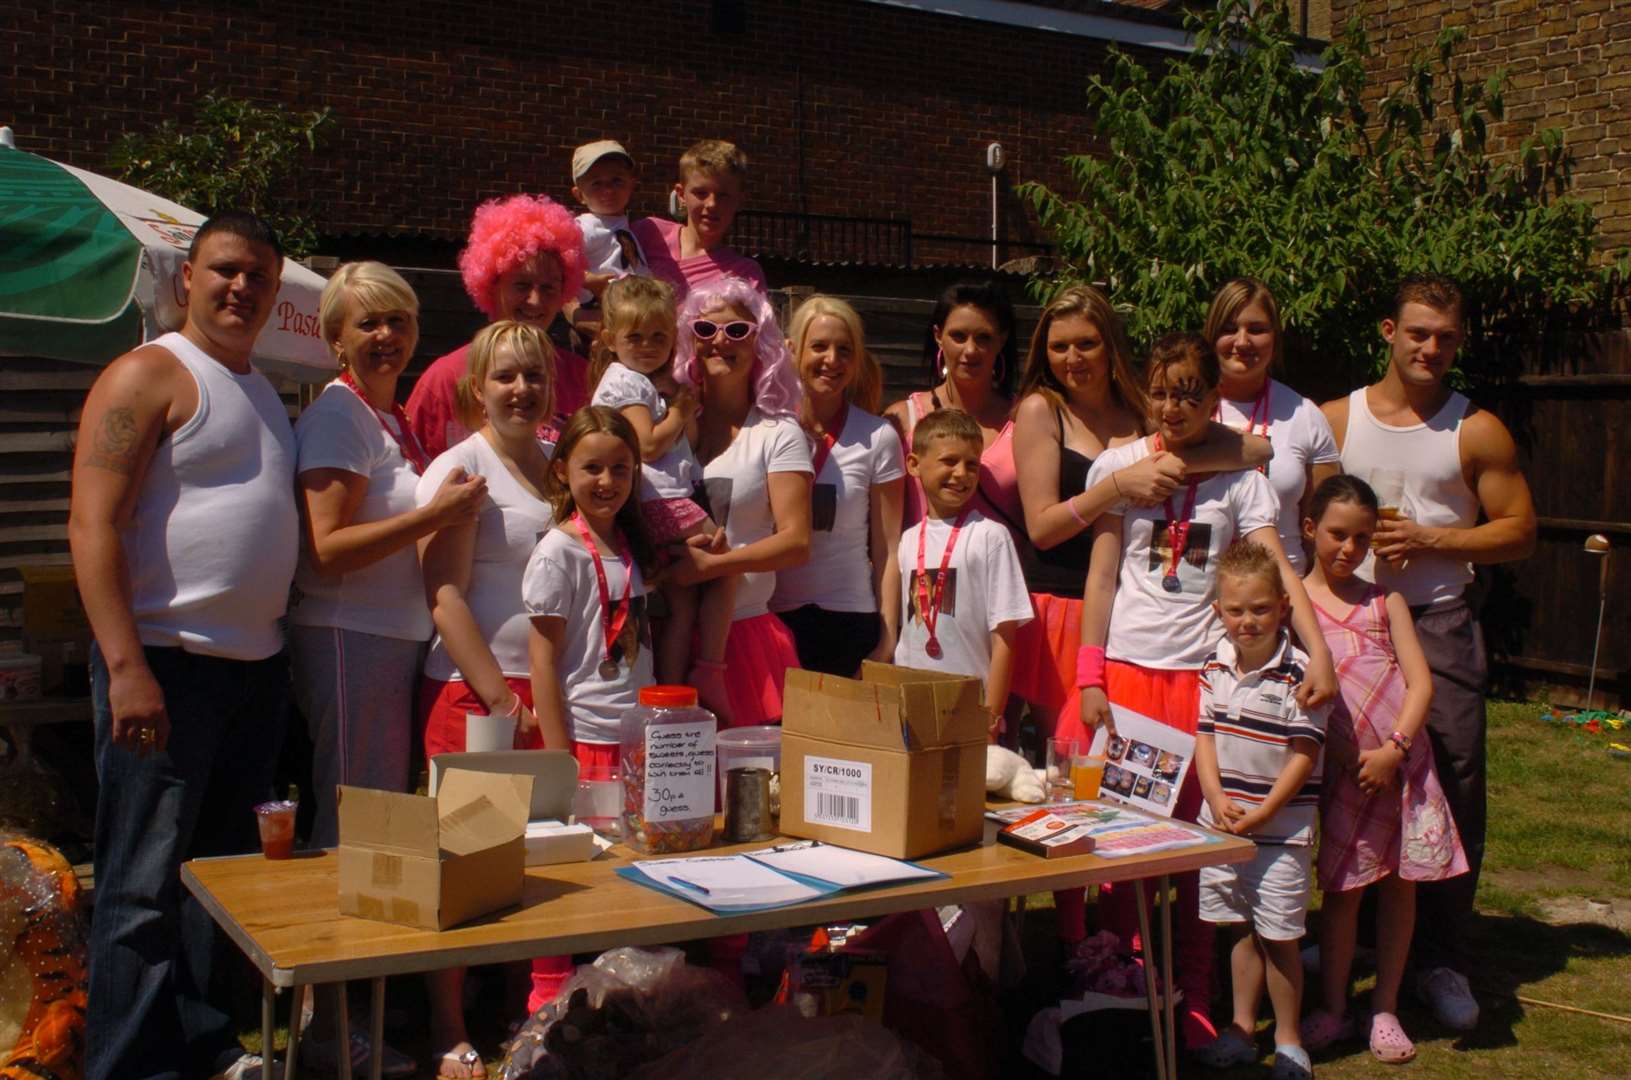 A fundraising extravaganza at the Little Crown pub in Chatham in May 2009. The pub, dating back to 1828, was closed by 2017. Picture: Steve Crispe